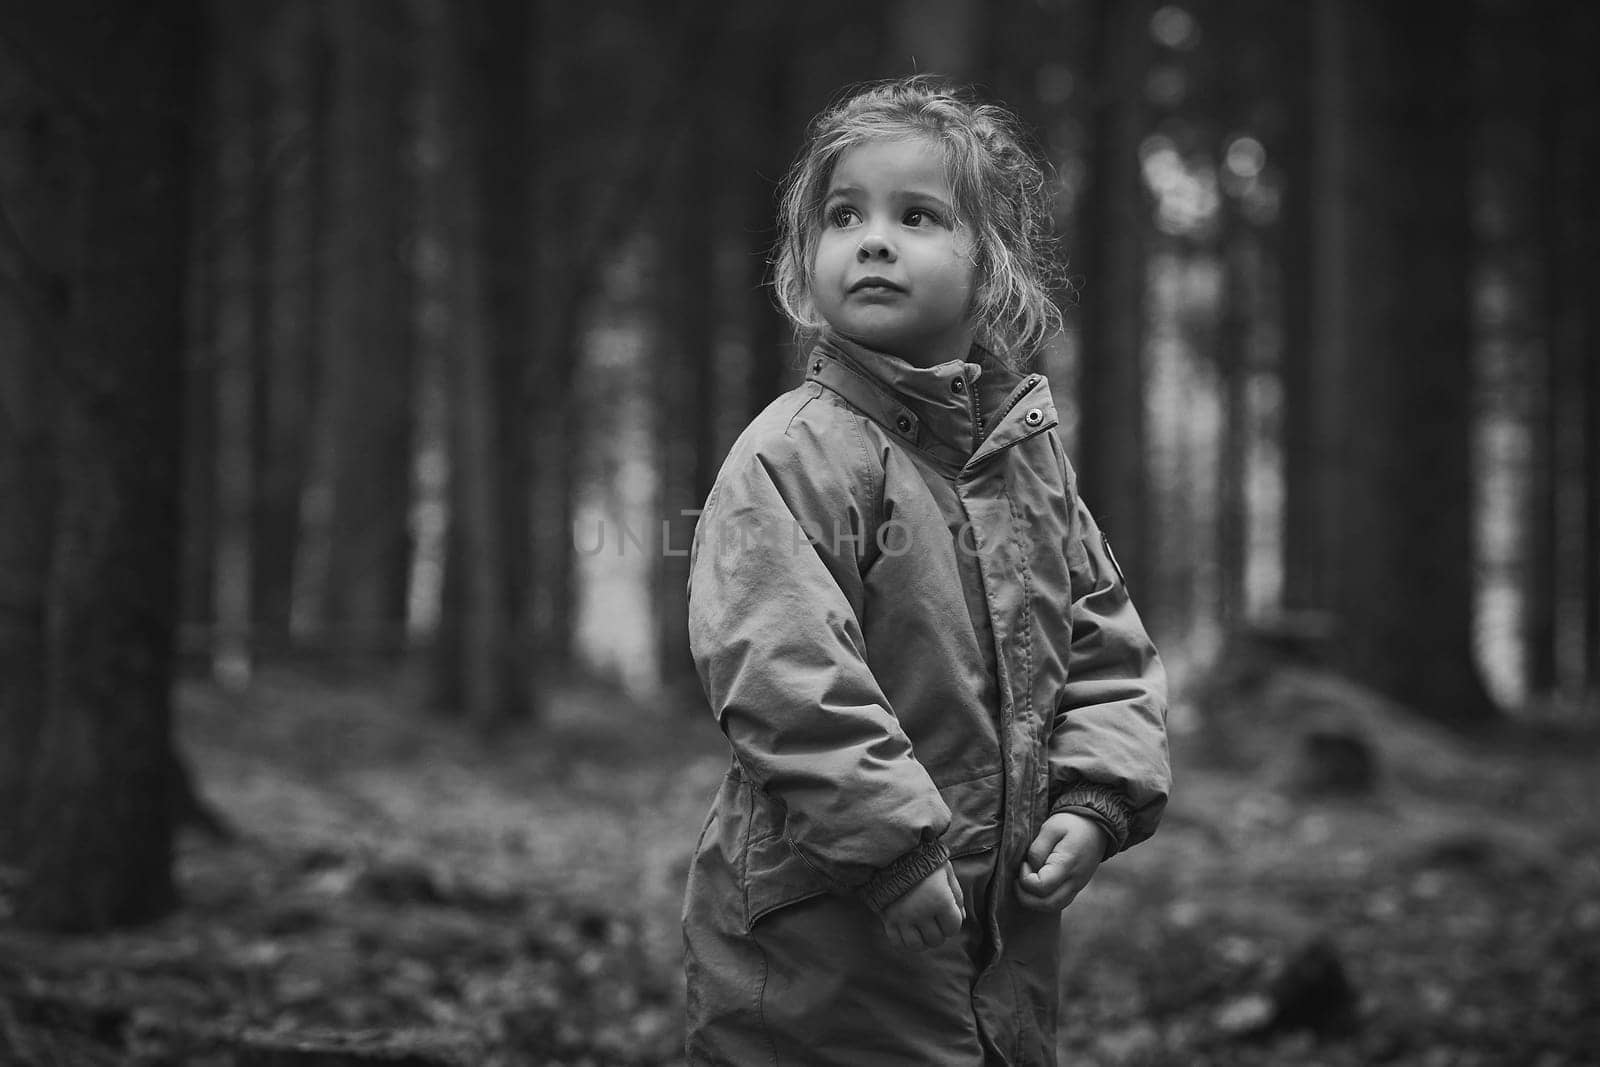 Beautiful child in the forest in Denmark.